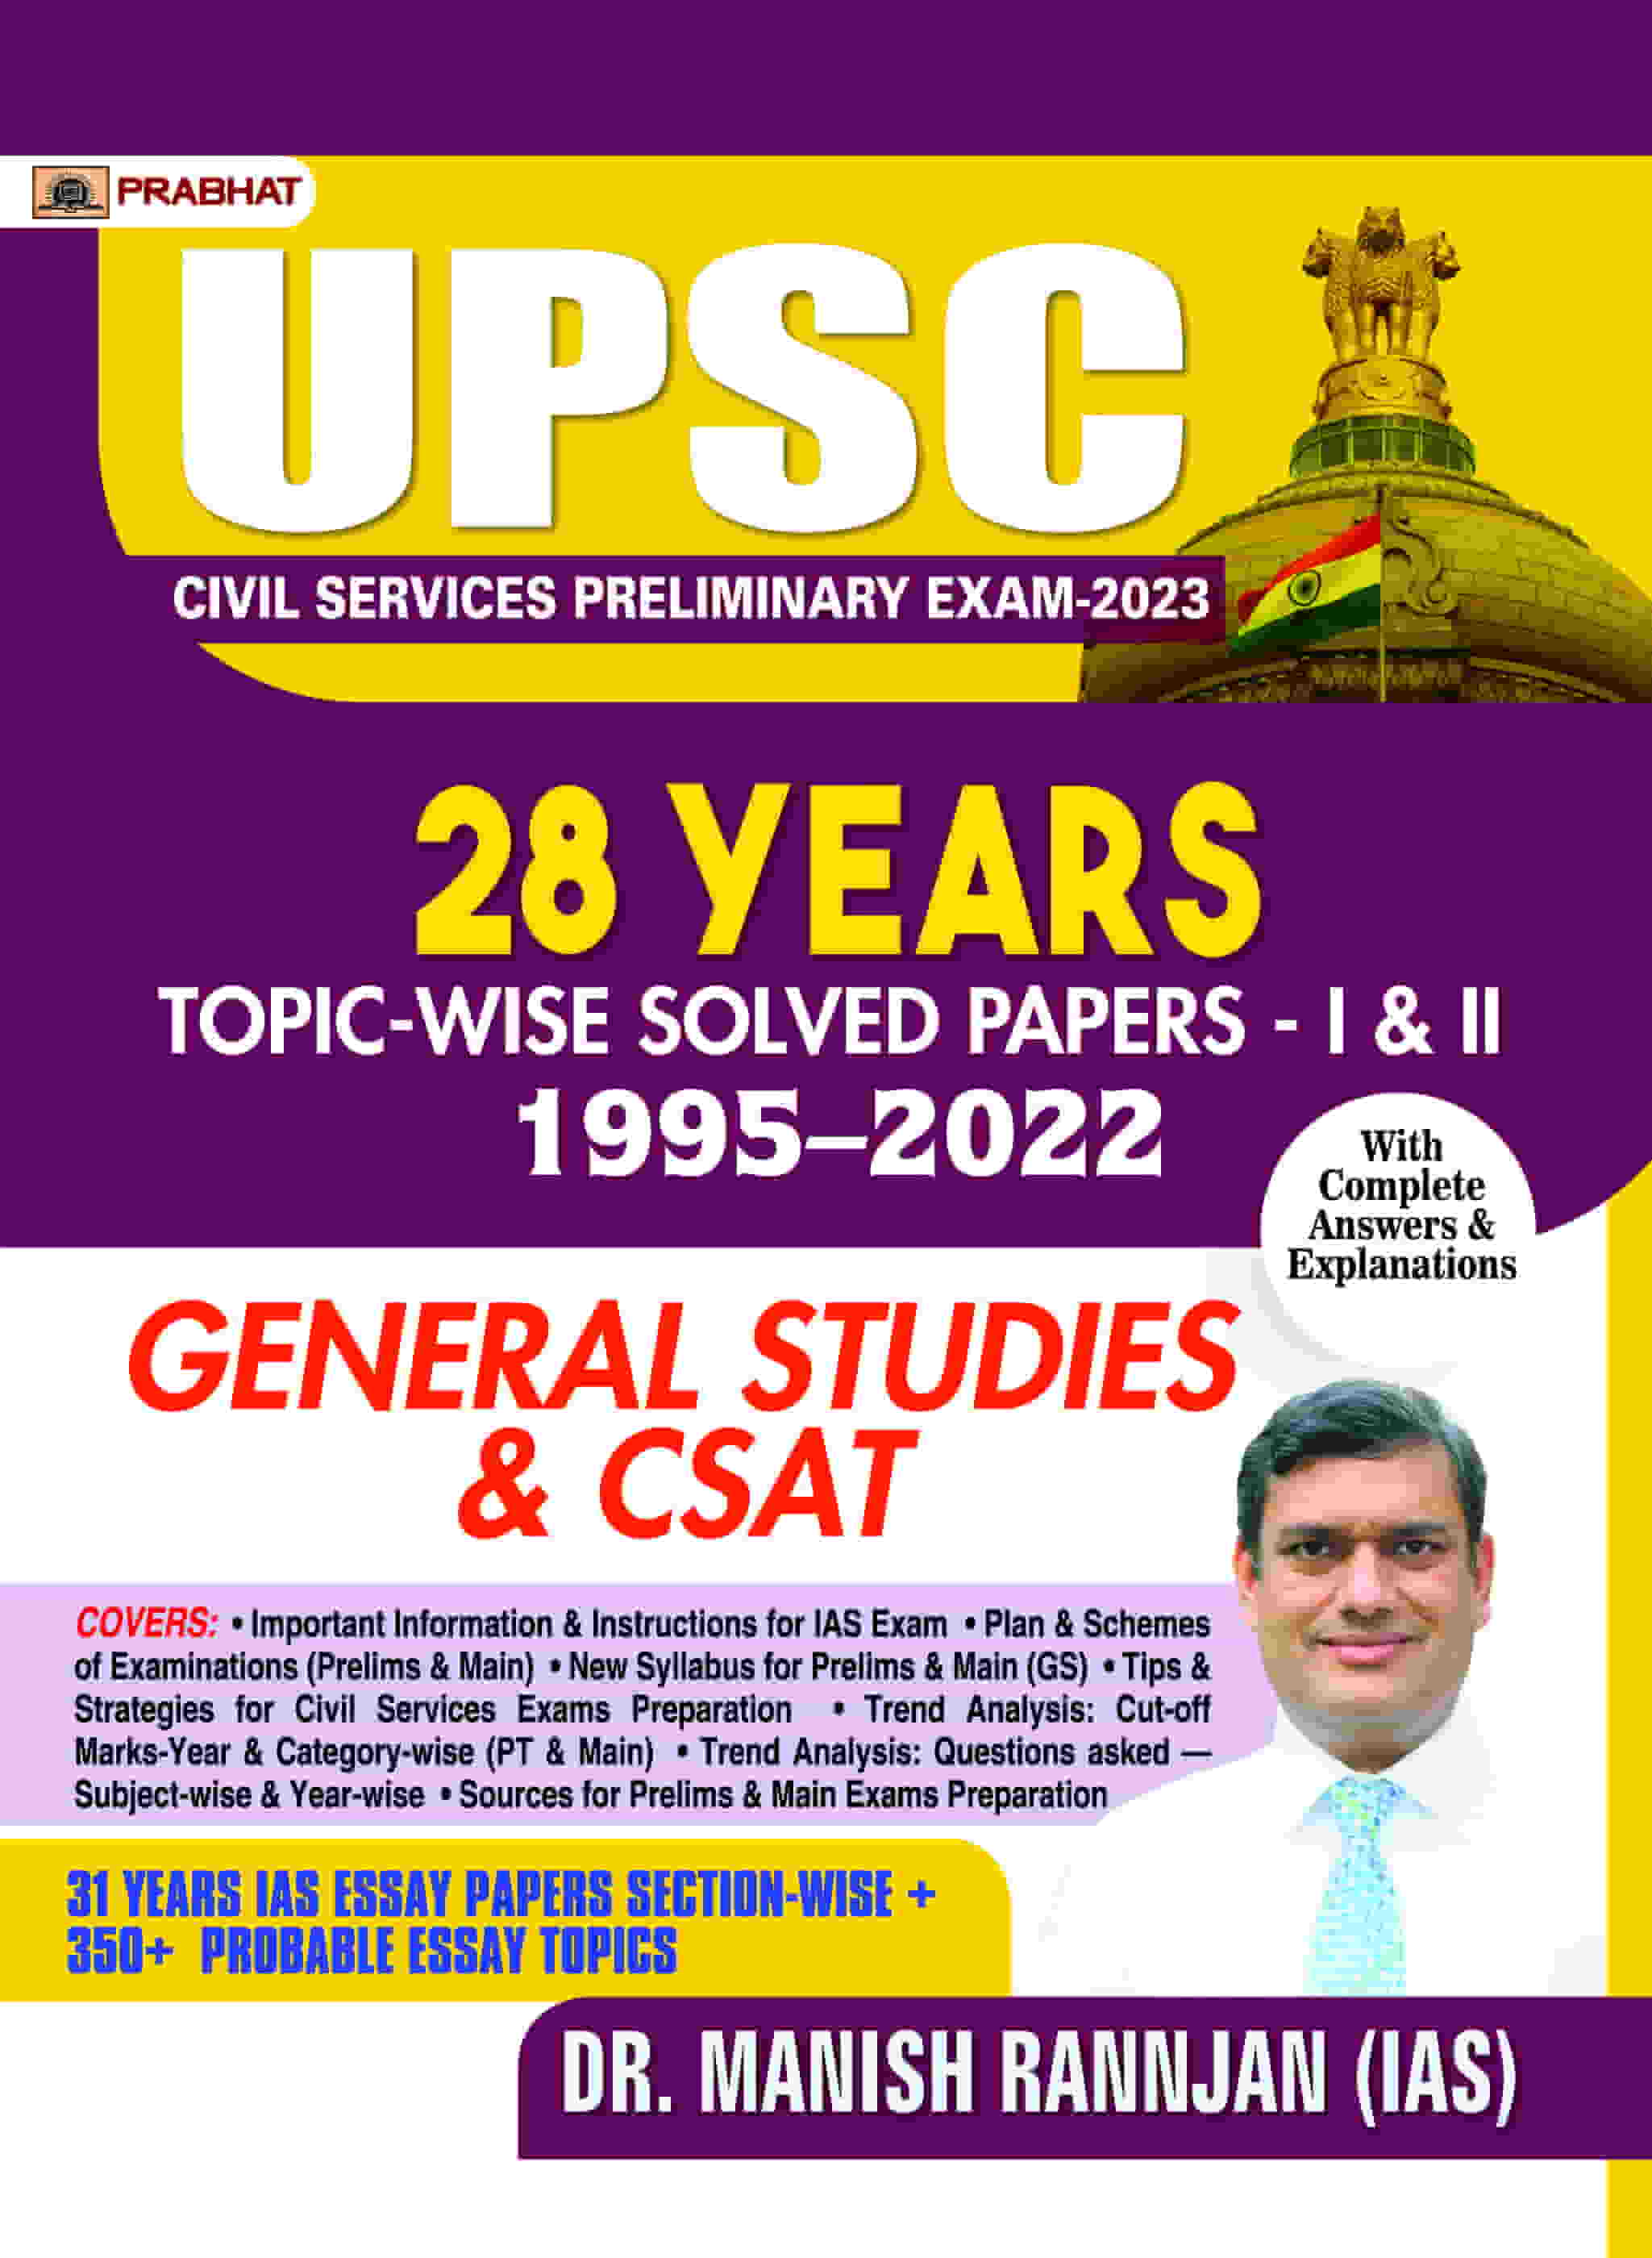 UPSC Civil Services Preliminary Exam-2023, 28 Years Topic-wise Solved Papers 1995–2022 General Studies & CSAT Paper-I & II